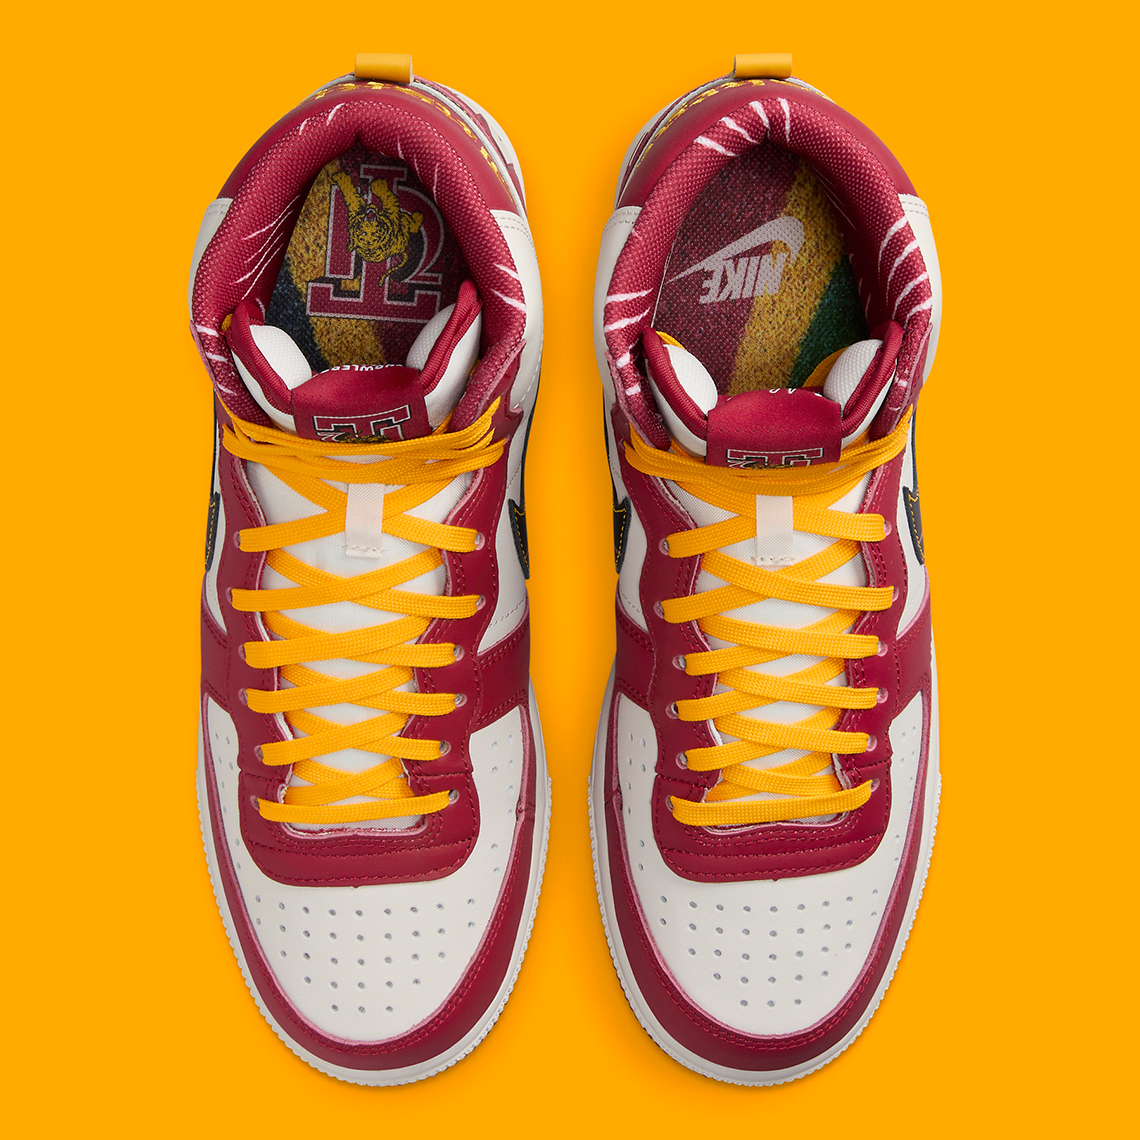 NIKE SB DUNK LOW "NIGHT OF MISCHIEF" Tuskegee Institute Fv4336 001 4